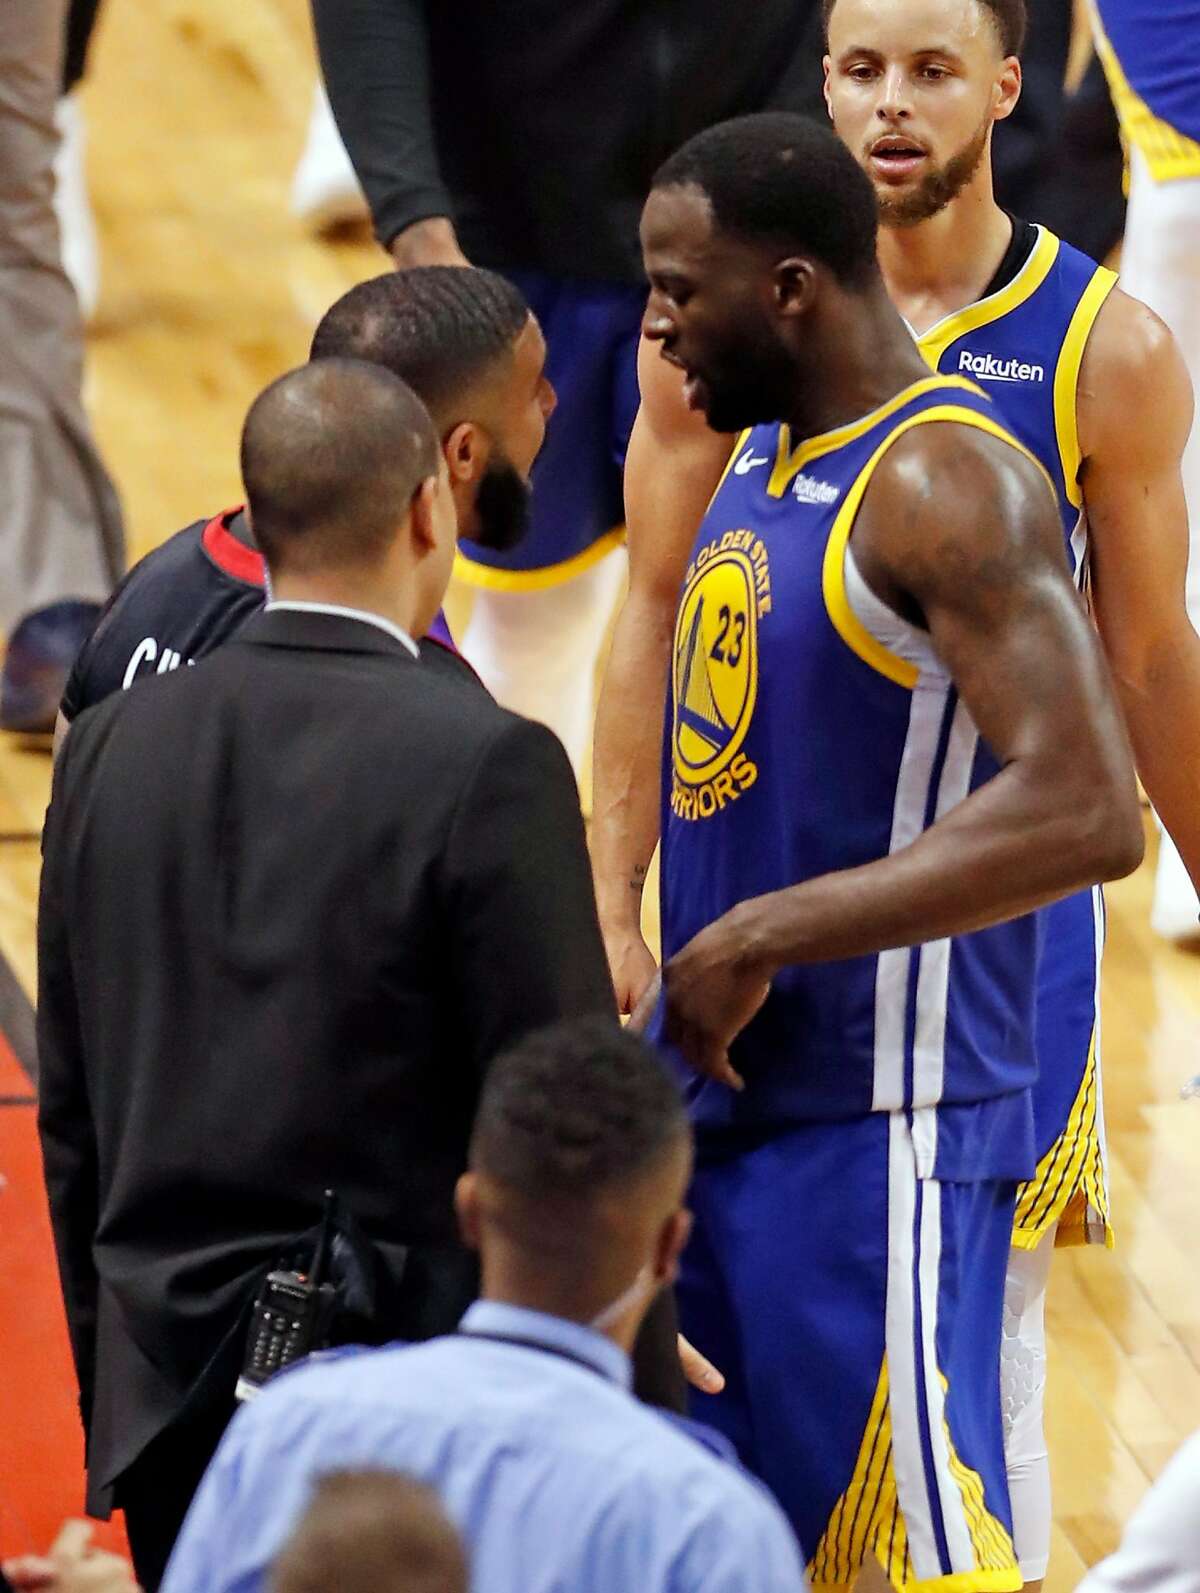 Drake and Golden State Warriors' Toronto Raptors' Draymond Green exchange words after Toronto's 118-109 win in NBA Finals' Game 1 at ScotiaBank Arena in Toronto, Ontario, Canada, on Thursday, May 30, 2019.